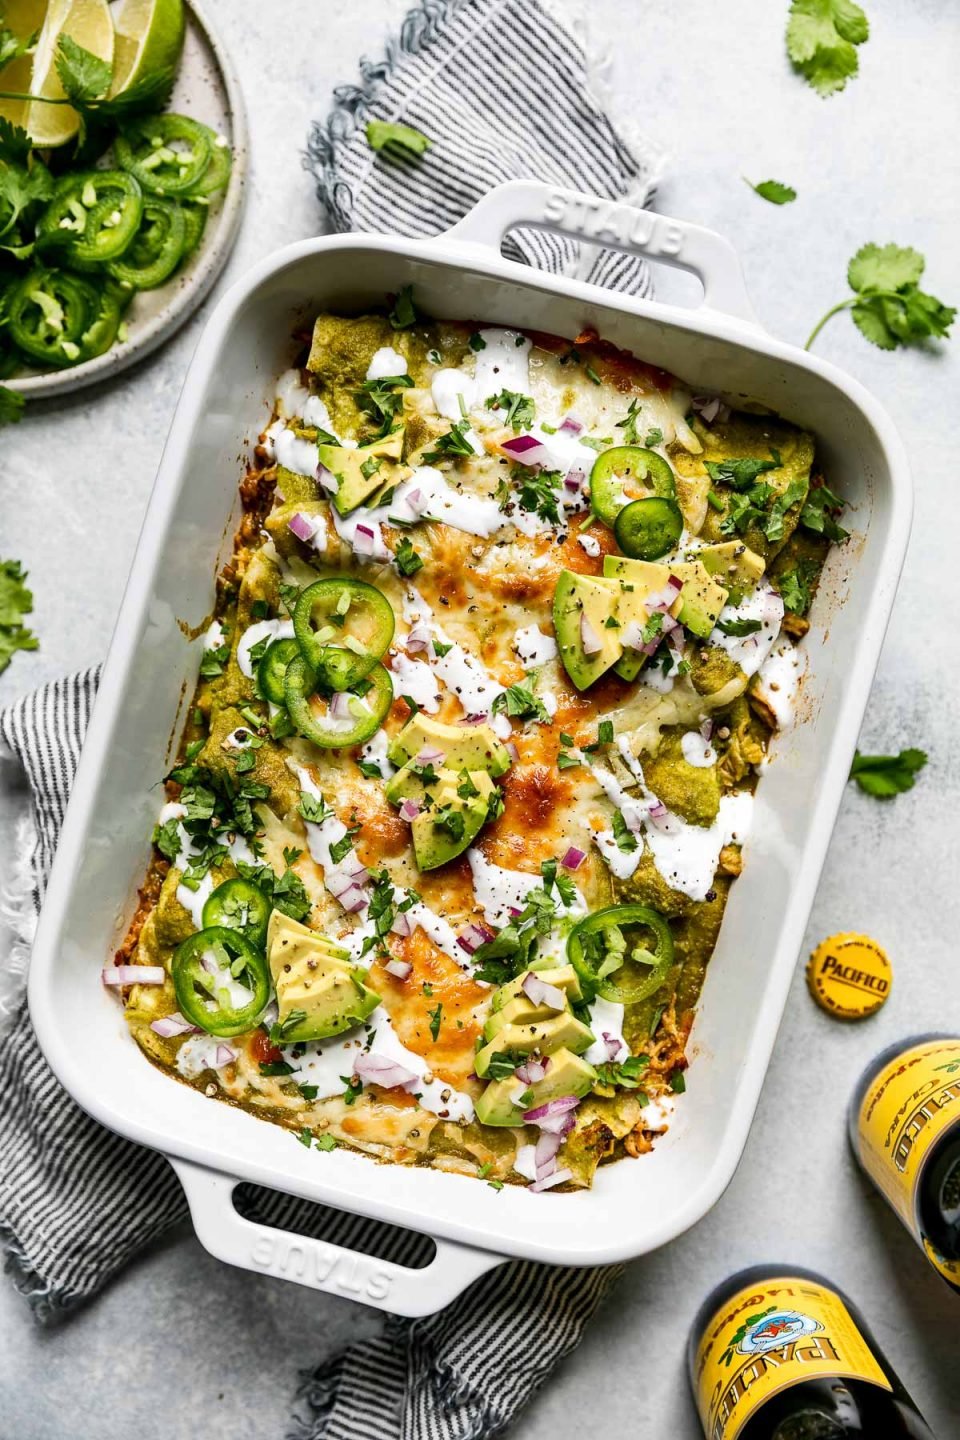 Baked green enchiladas covered in cheeese, red onion, avocado, & sliced jalapeno. The baking dish sits atop a striped gray linen napkin on a light blue surface, surrounded by cilantro leaves, Pacifico beer, & a small plate of garnishes (lime wedges, cilantro, sliced jalapeno, etc.)